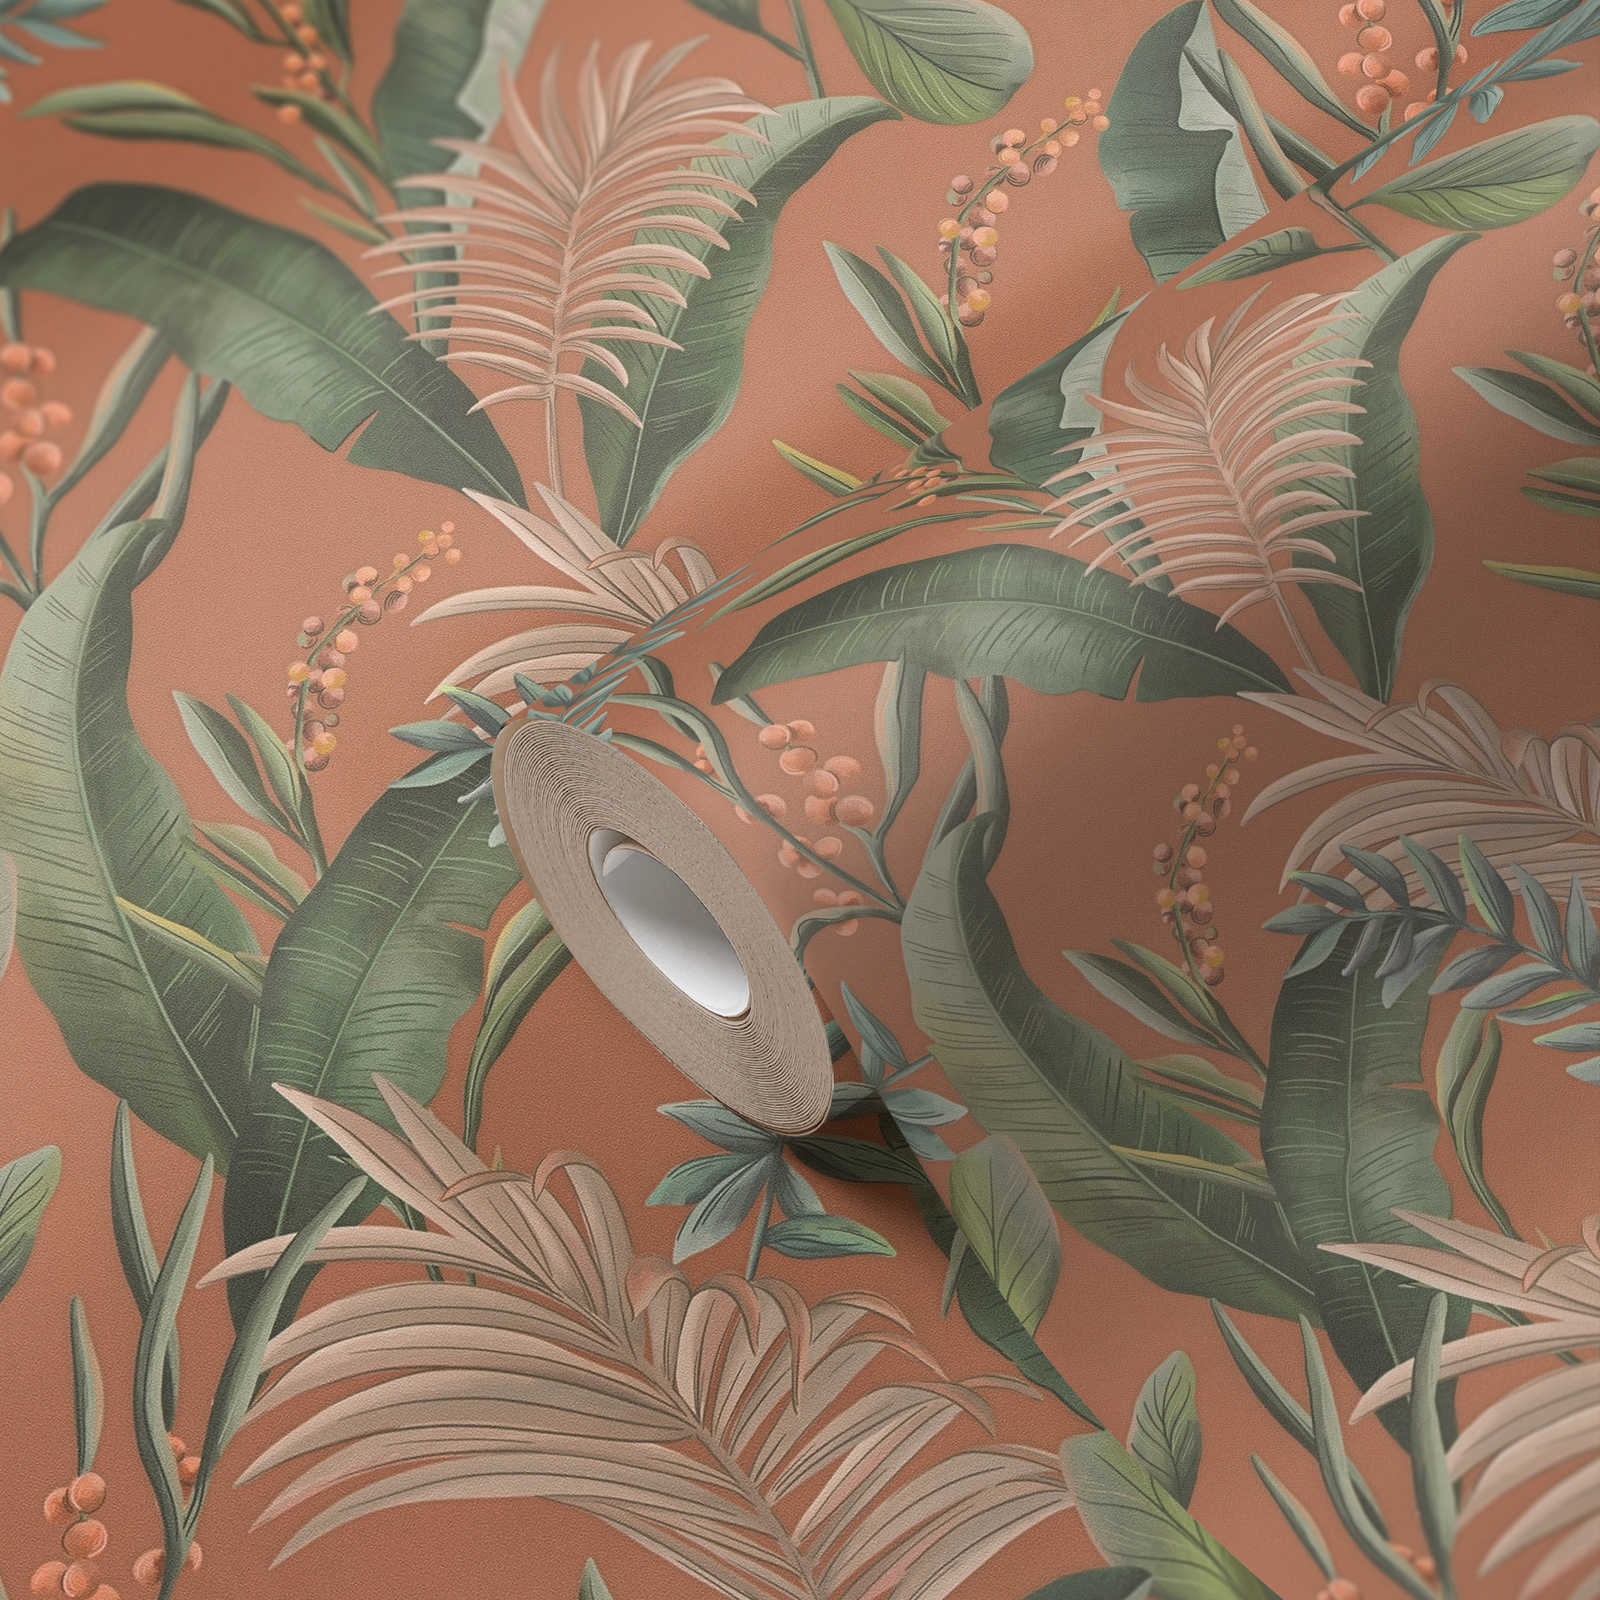             Floral jungle wallpaper with leaves matt textured - orange, red, green
        